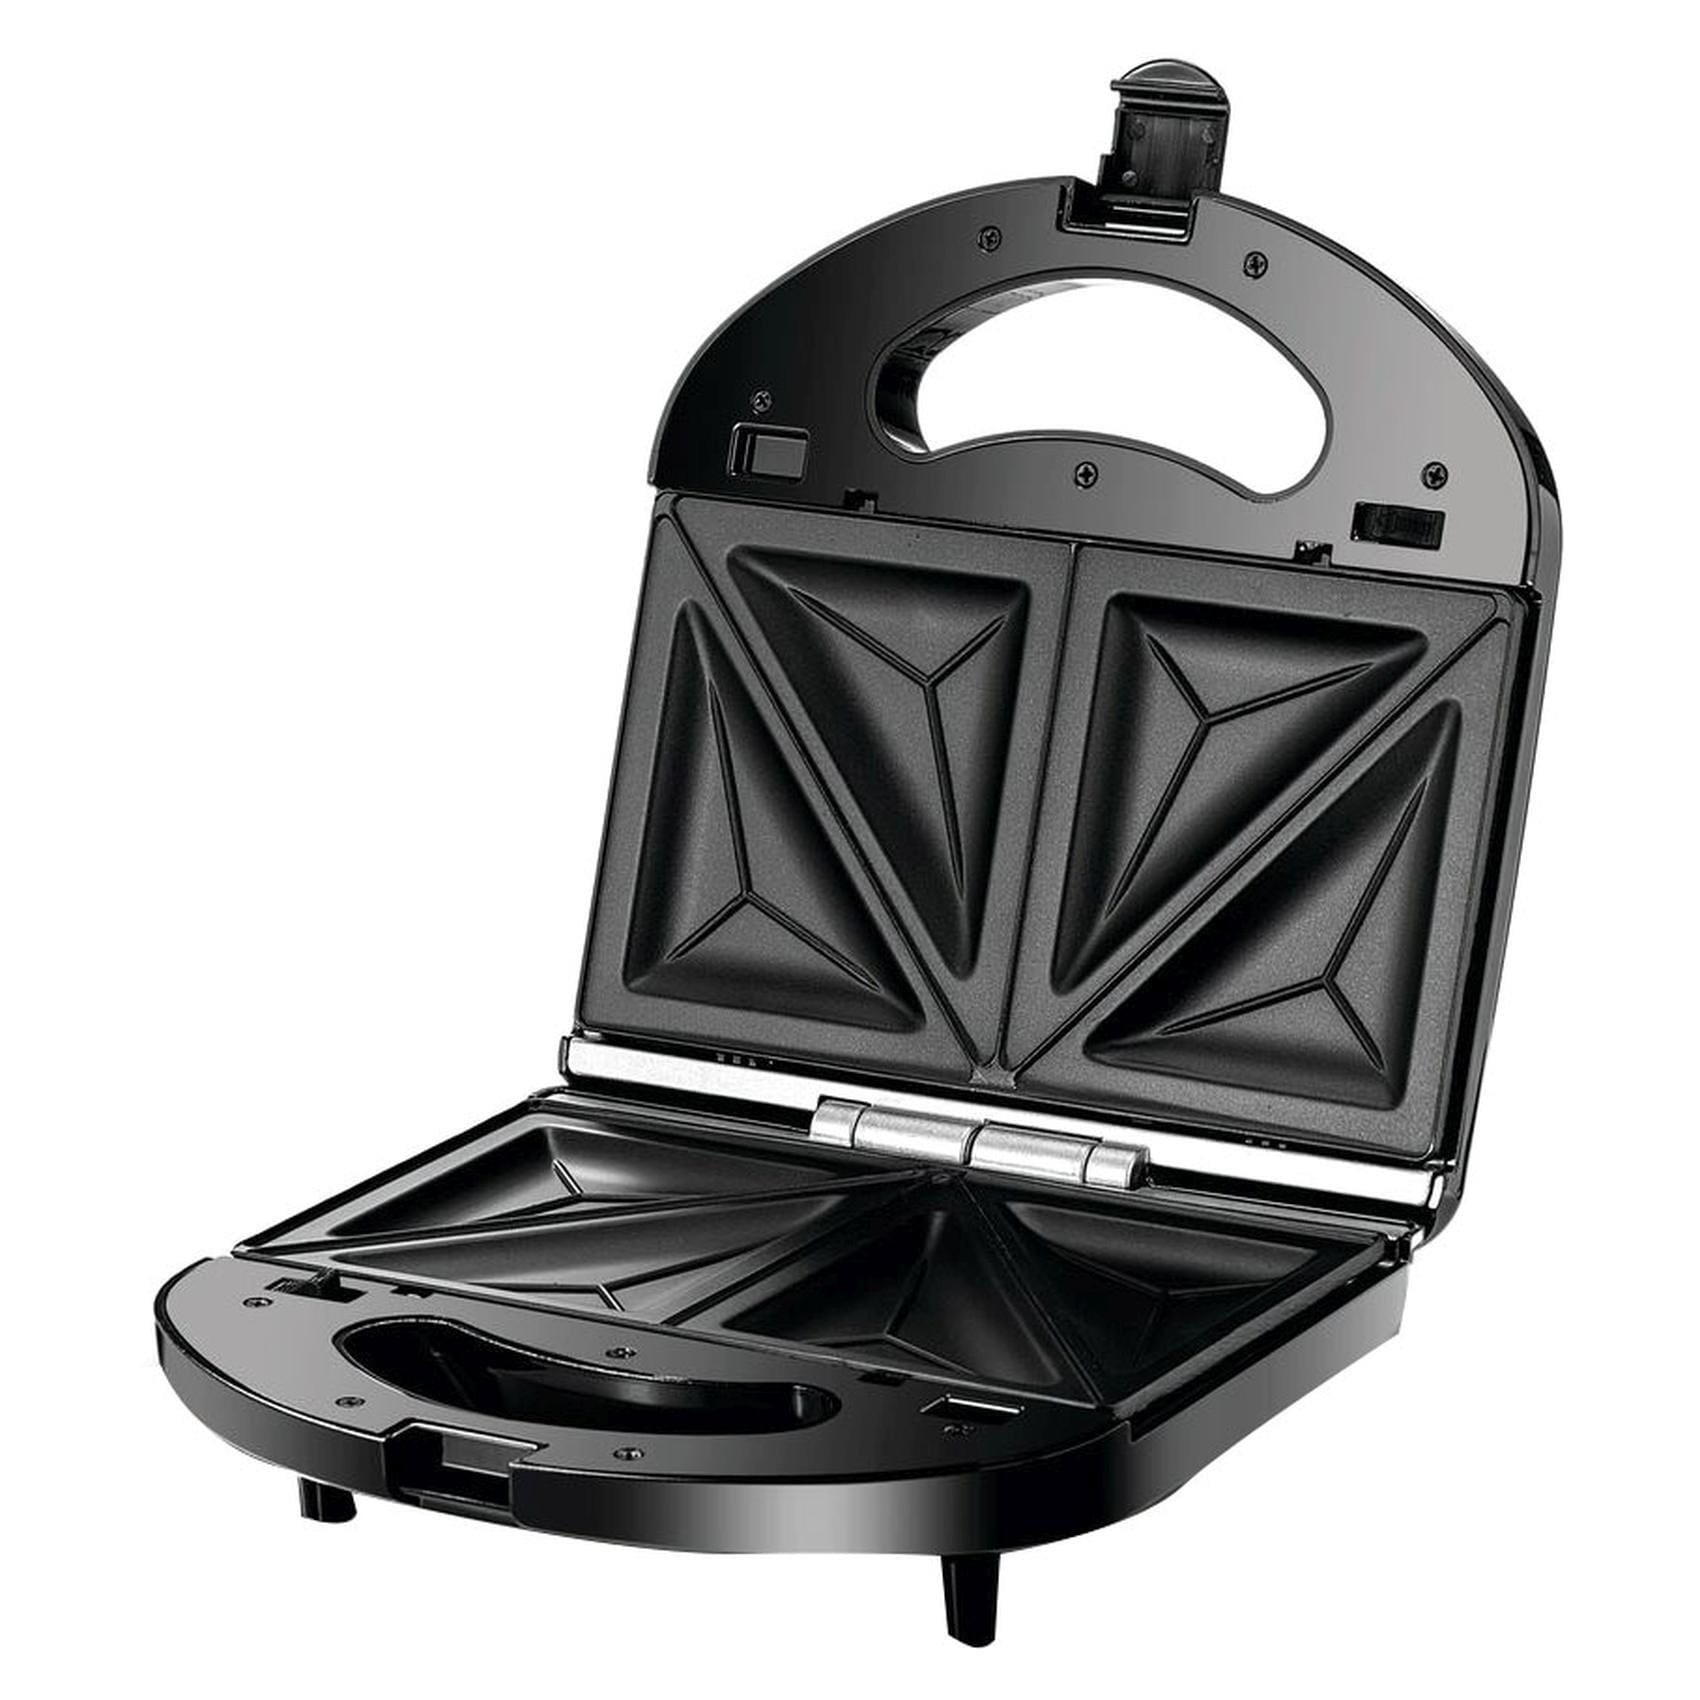 Black+Decker, TS2090, 750 Watts, 3-in-1 Sandwich, Grill and Waffle Maker, Review